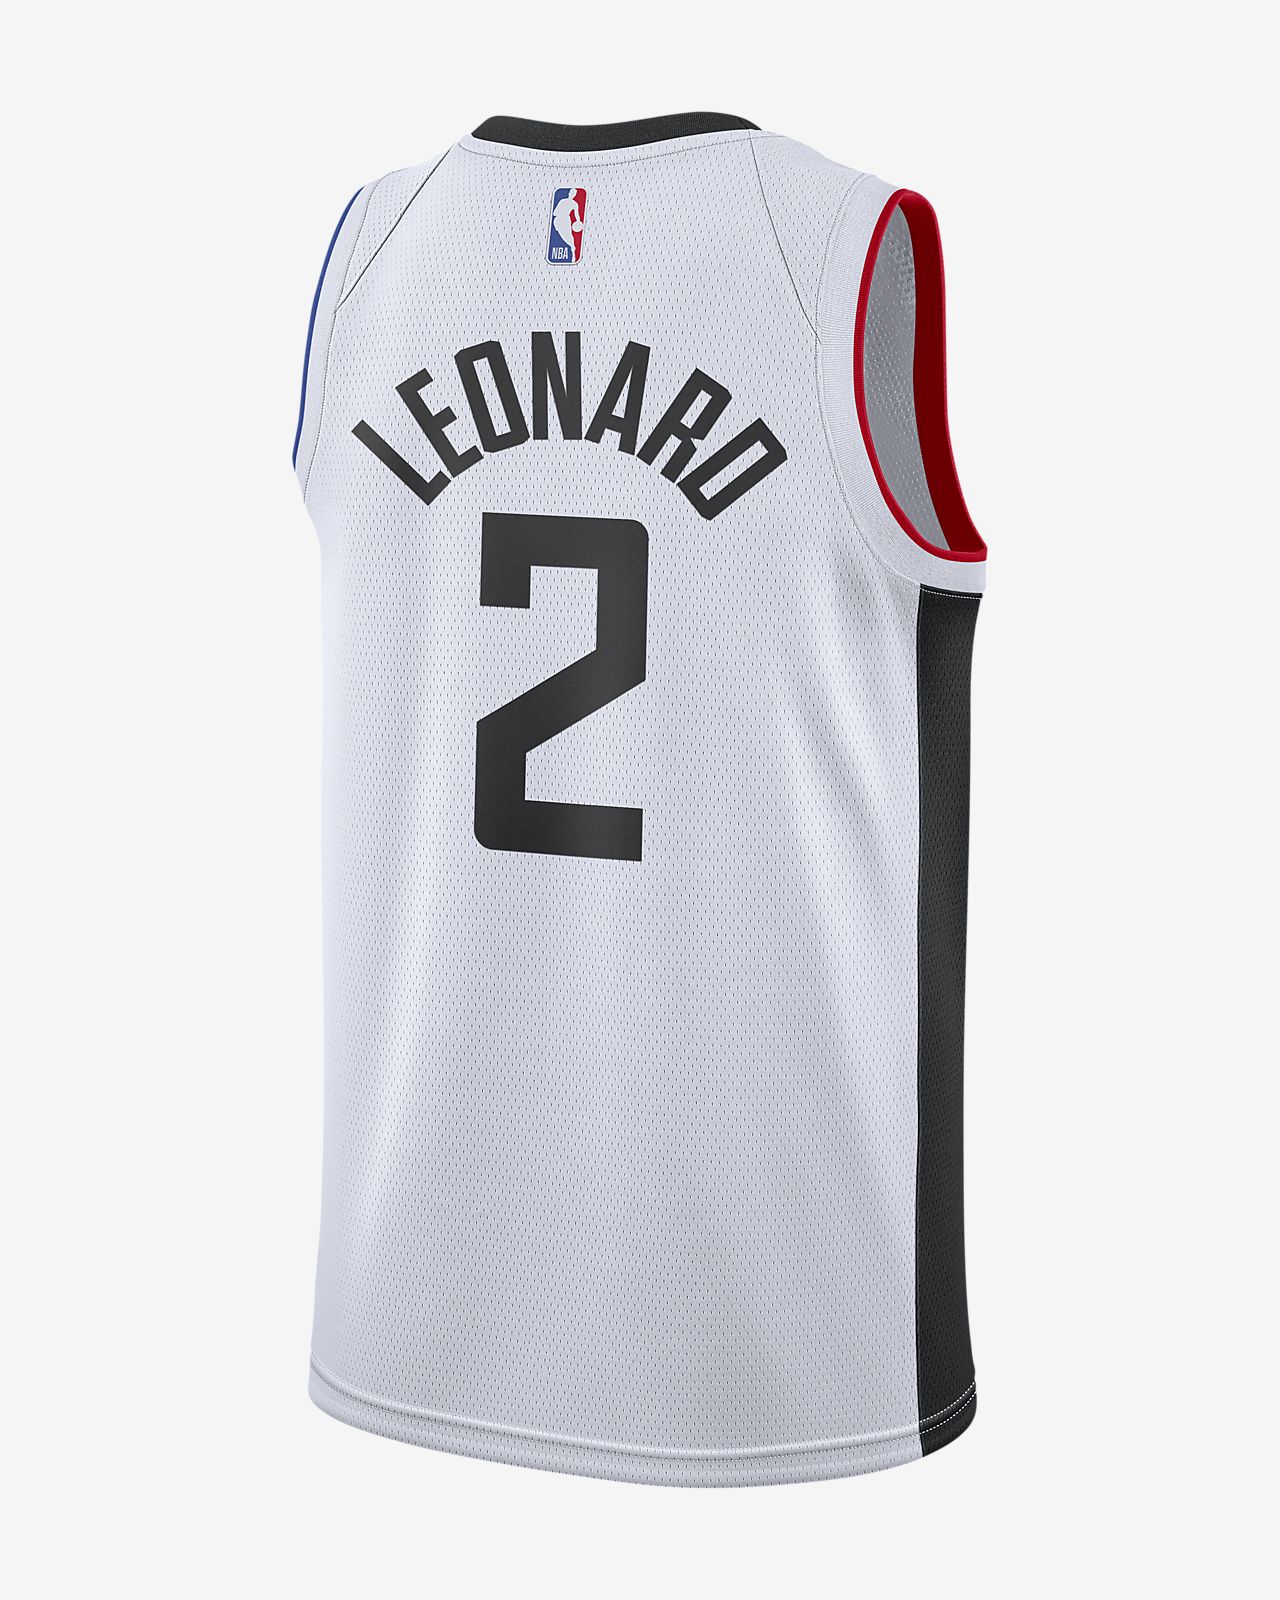 paul george jersey philippines